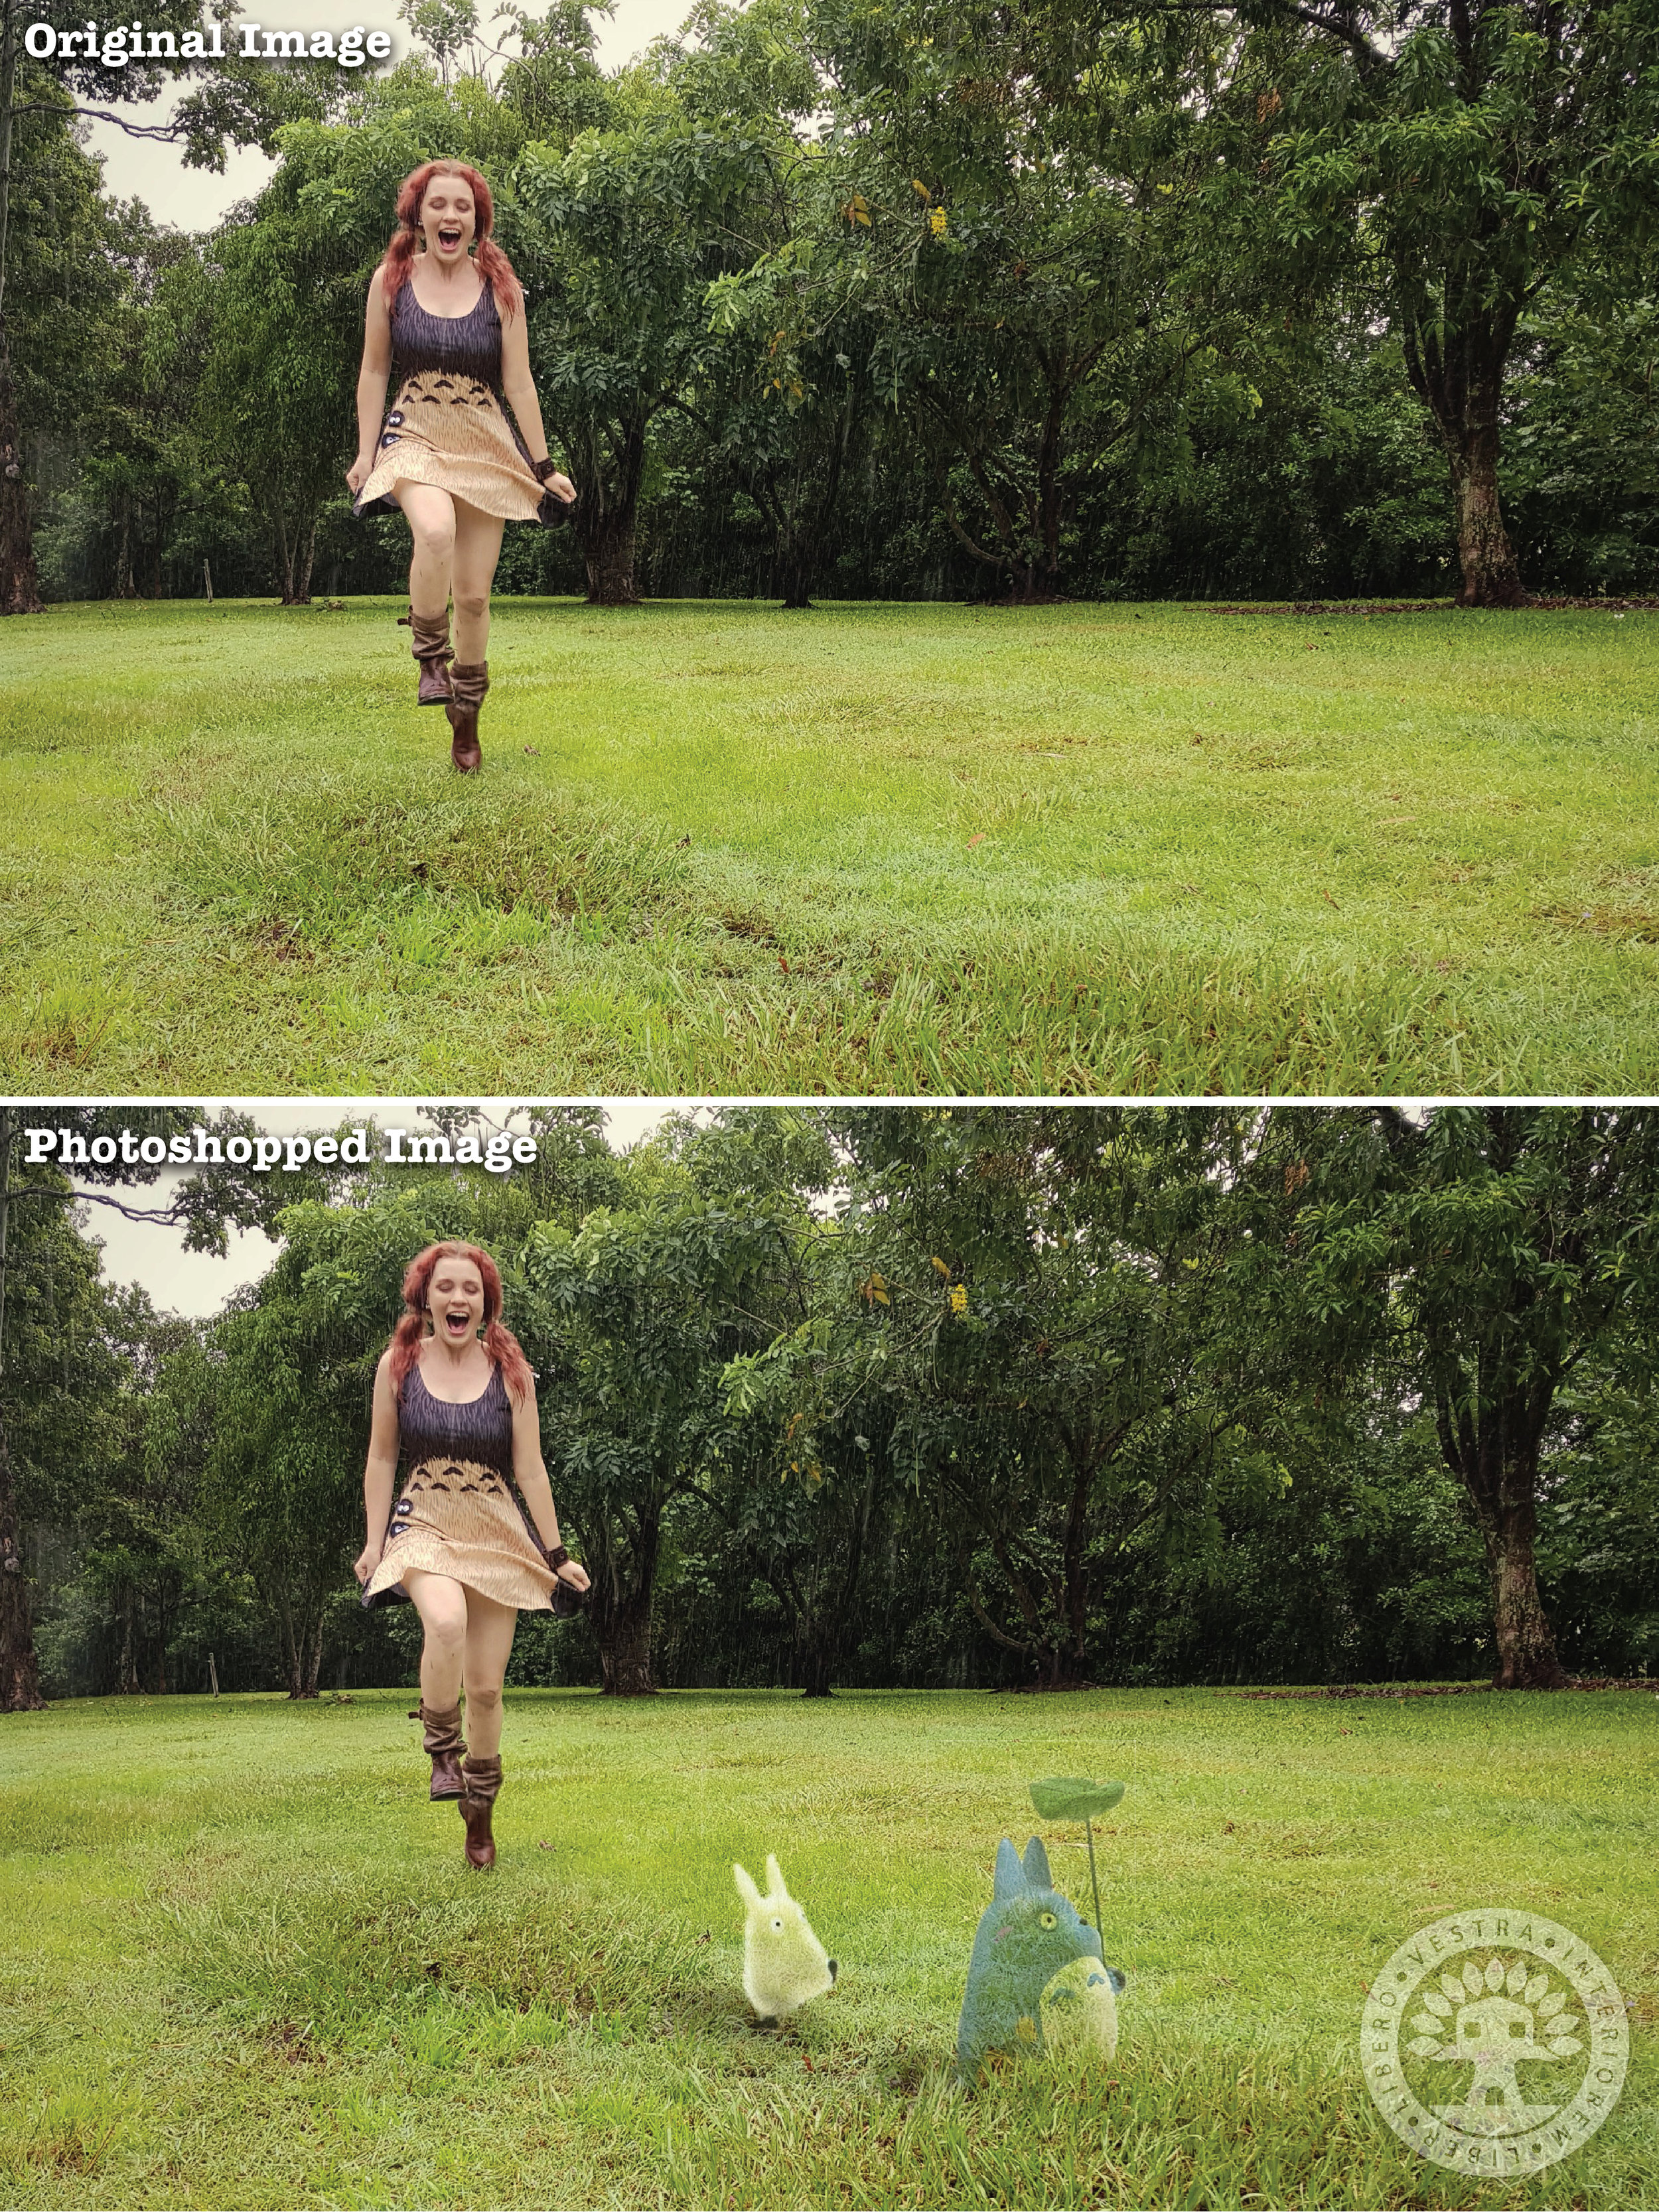 "Totoro Dress" before and after Photoshop . ~ Corinne Jade, ClubHouse Collective